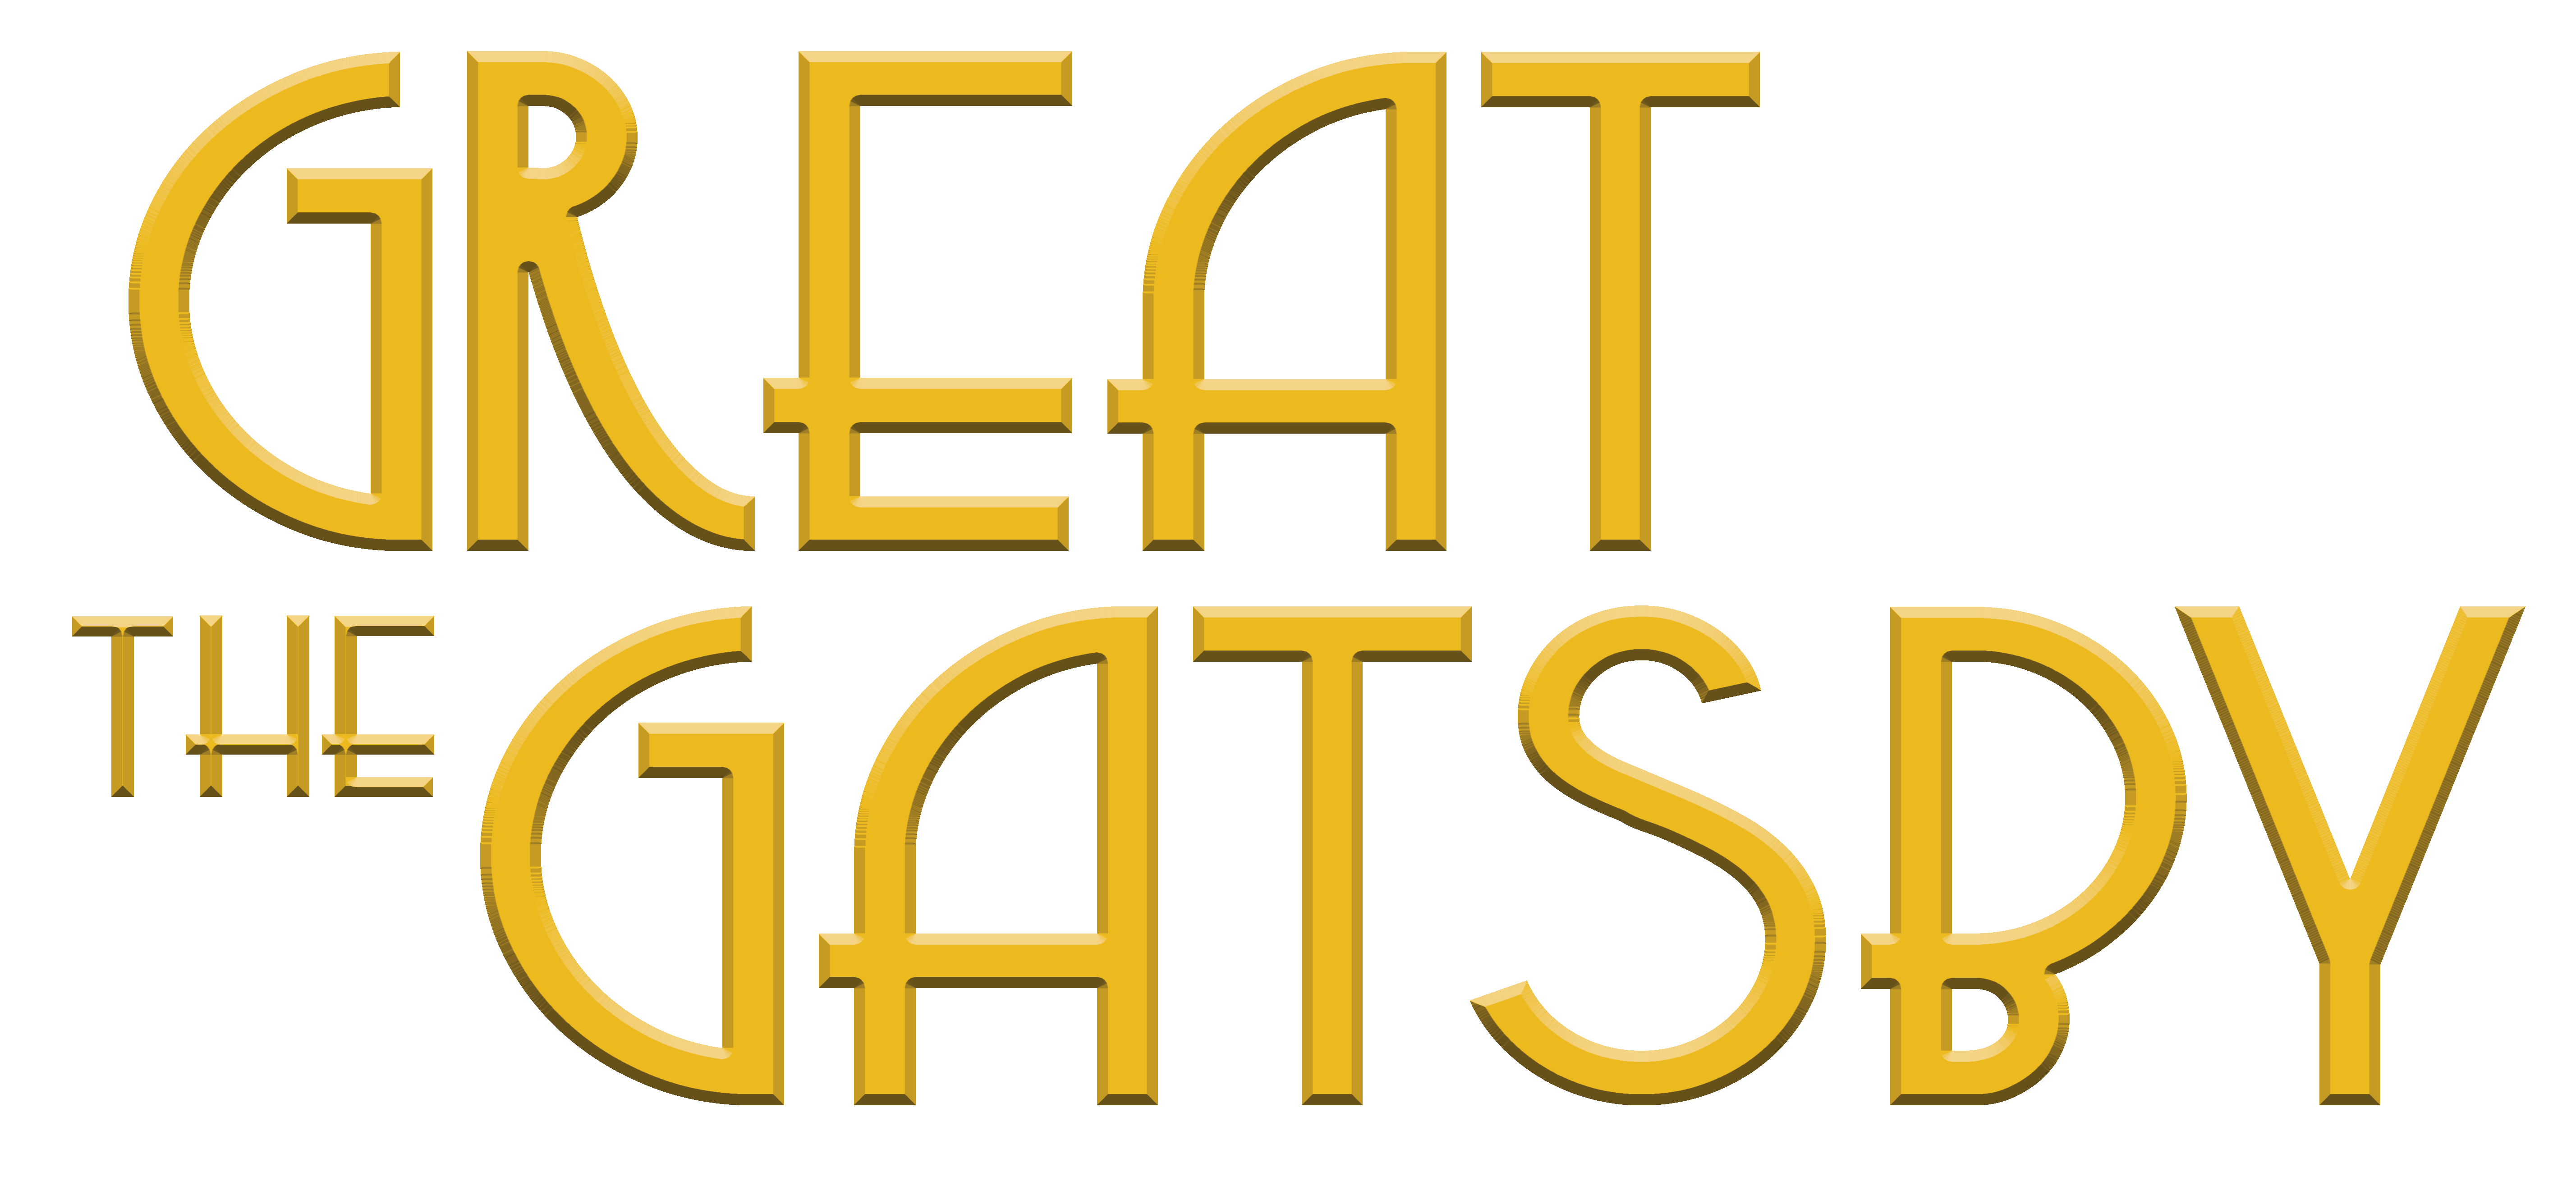 Gatsby Logo - The Great Gatsby - Willow Bend Center of the Arts - North Texas ...